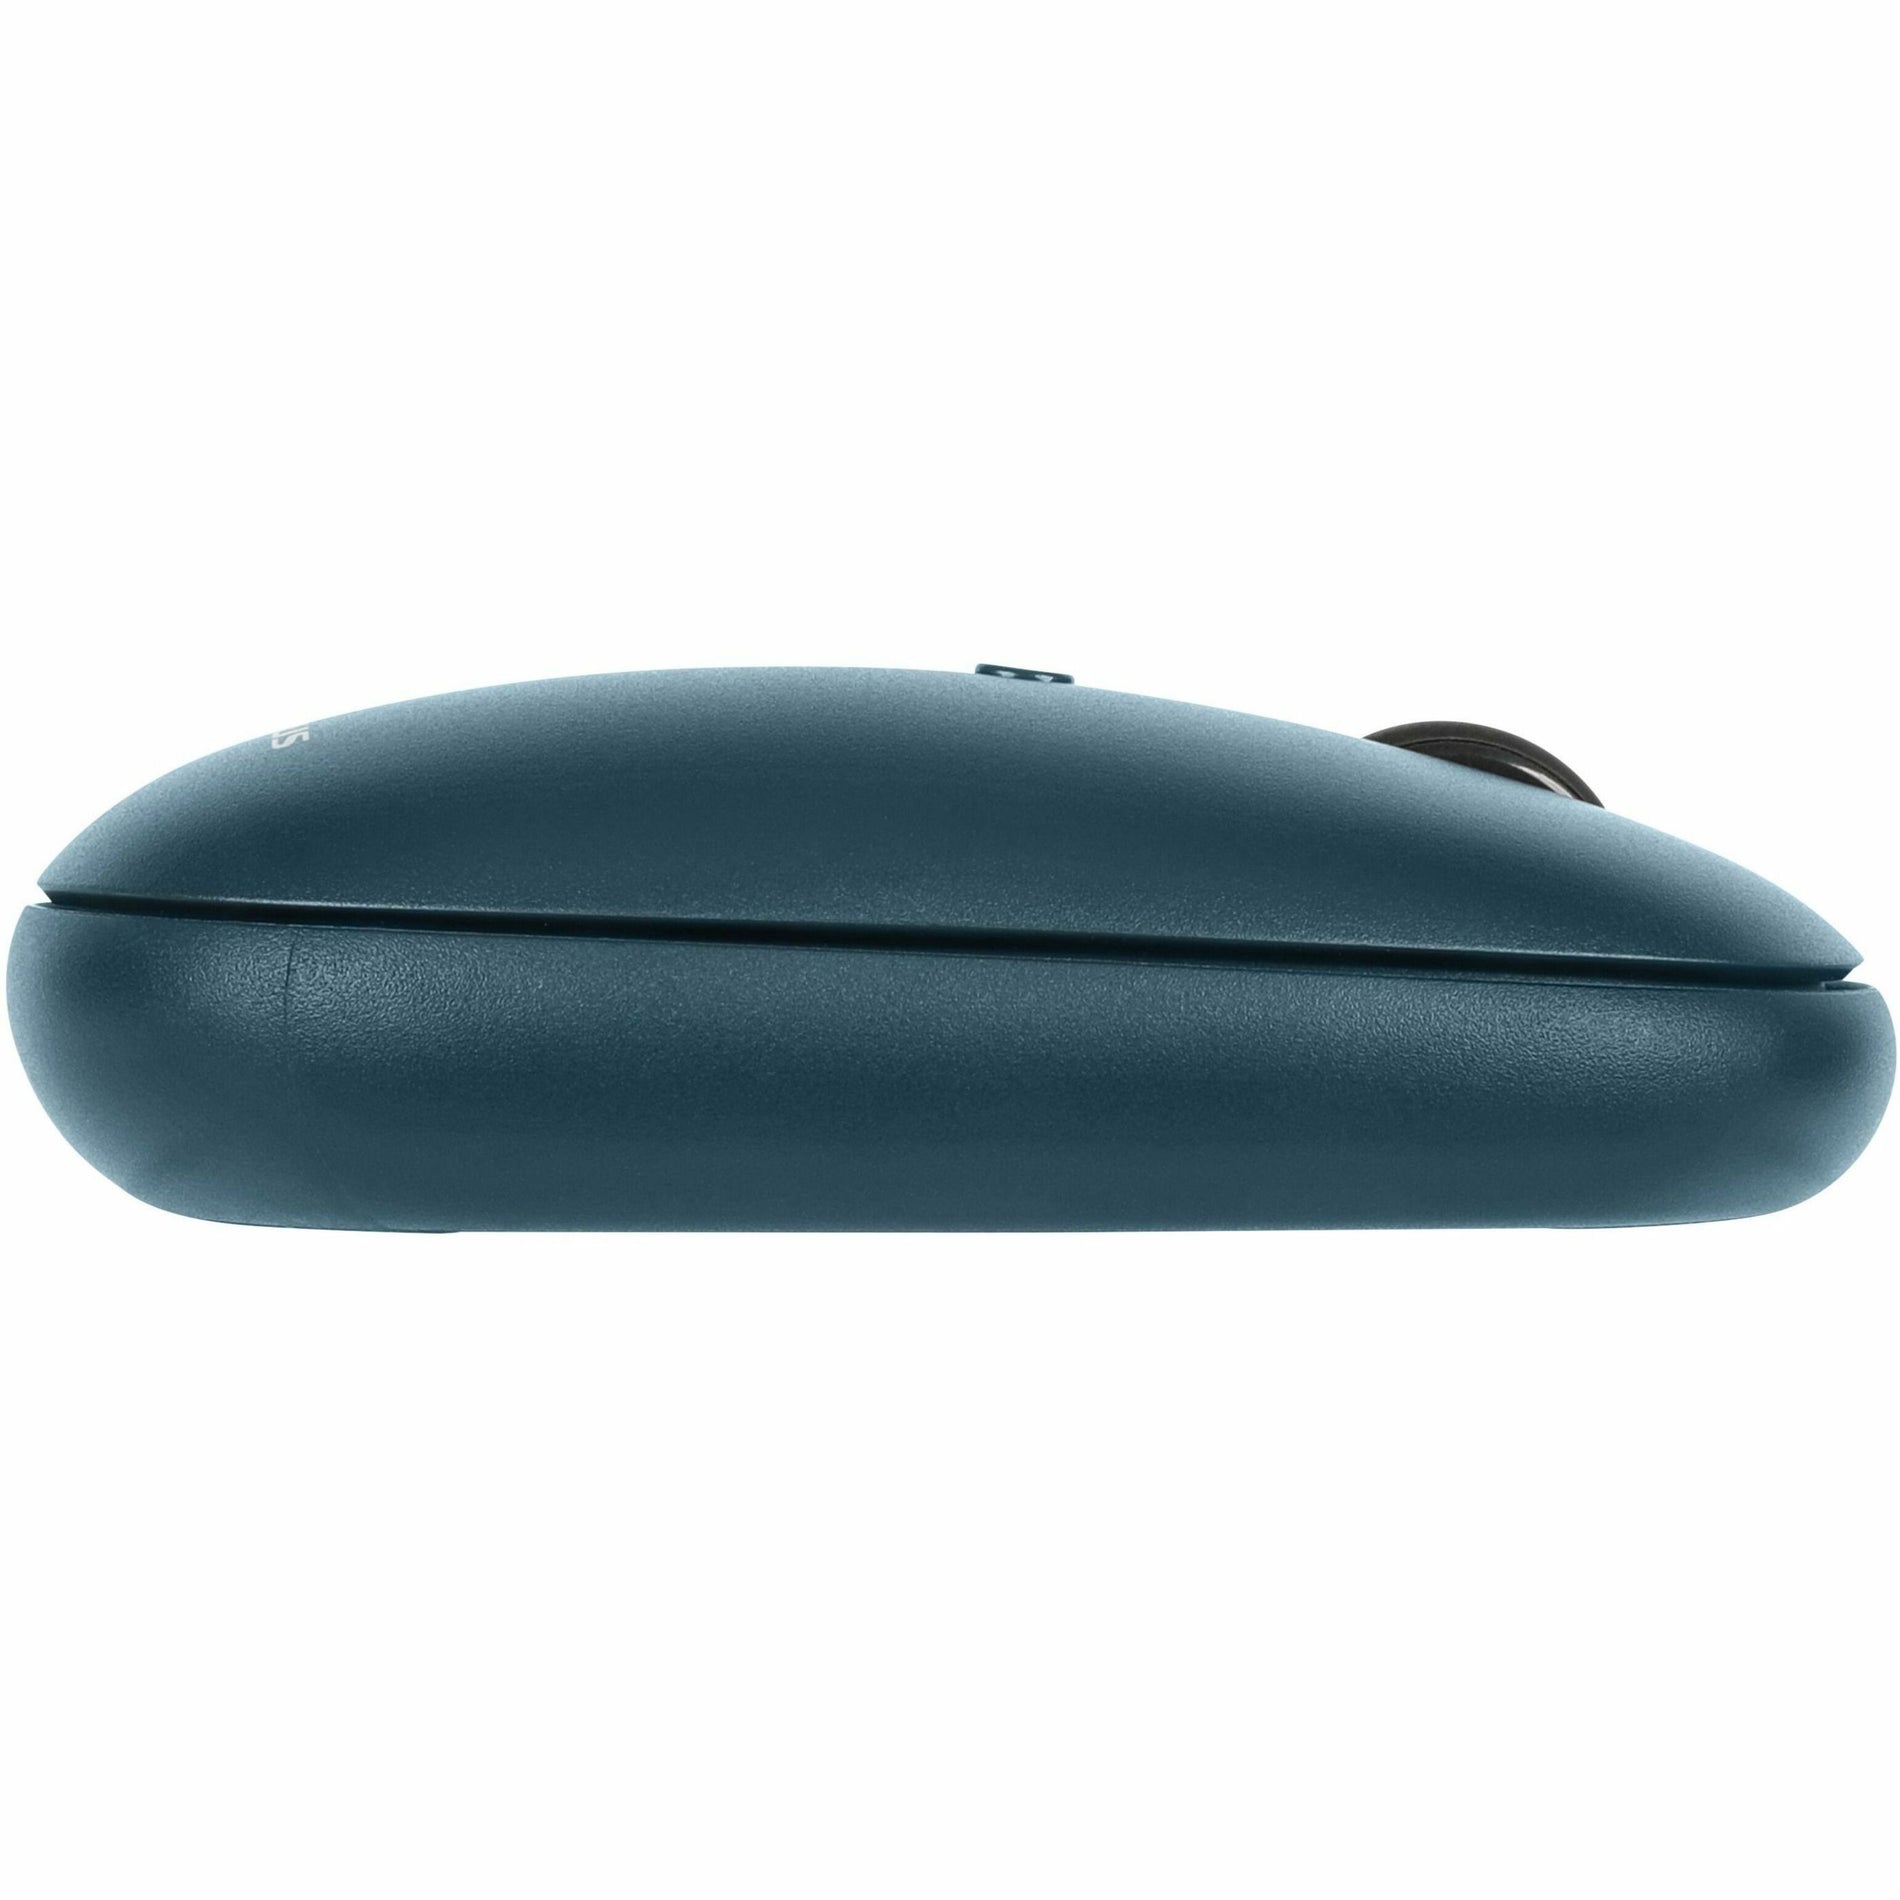 Targus PMB58102GL Compact Mouse Wireless Blue